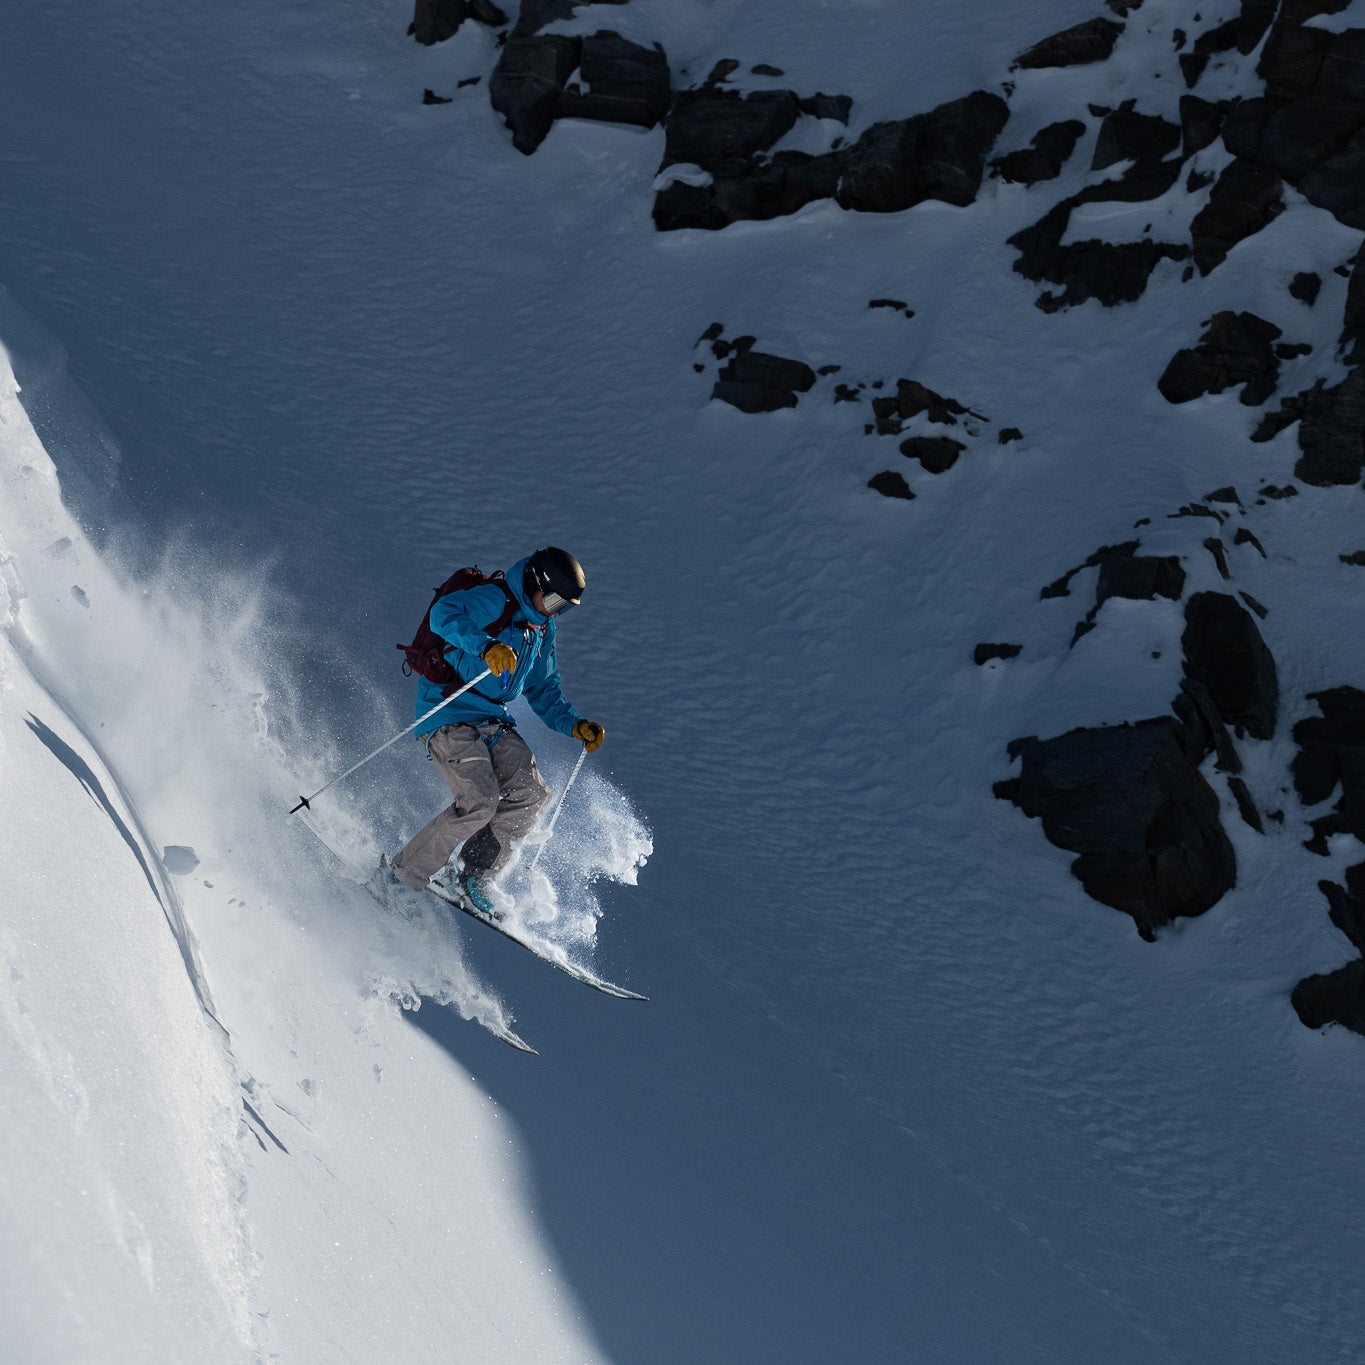 A skier dropping into pow